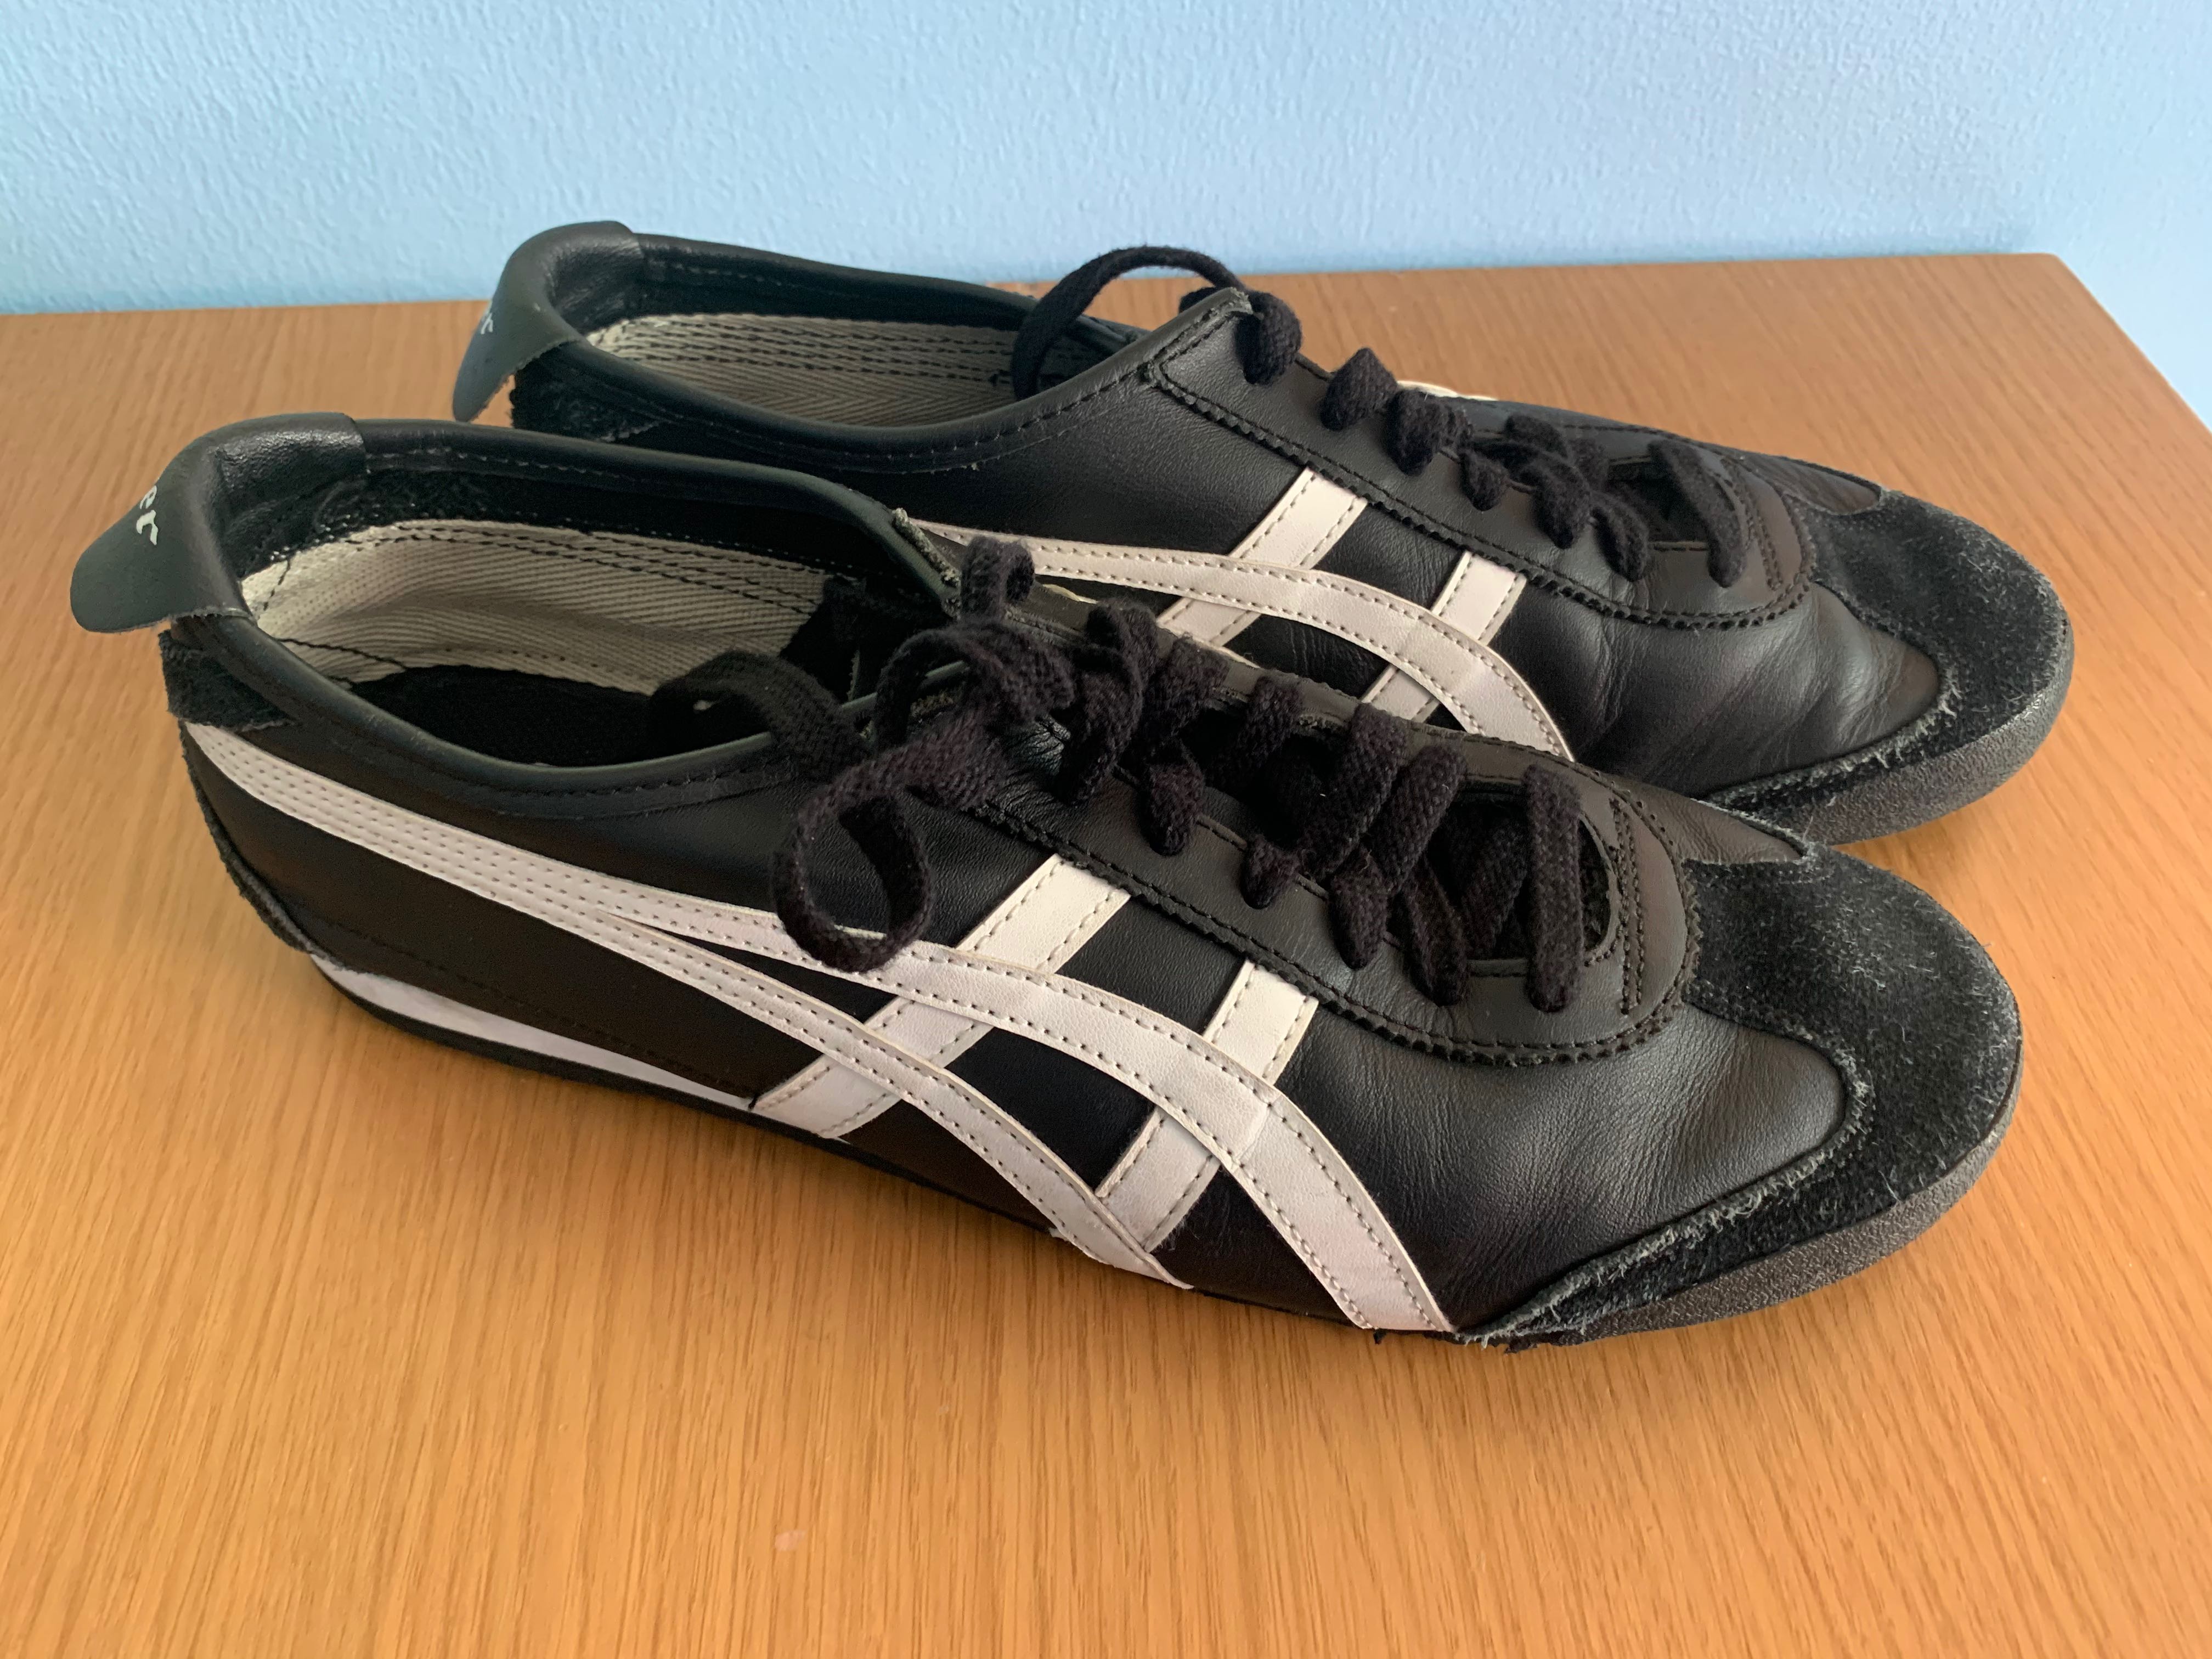 Onitsuka Tiger Shoes Men's 9.5 Traxy Black Suede Sneakers Trainers |  eBay